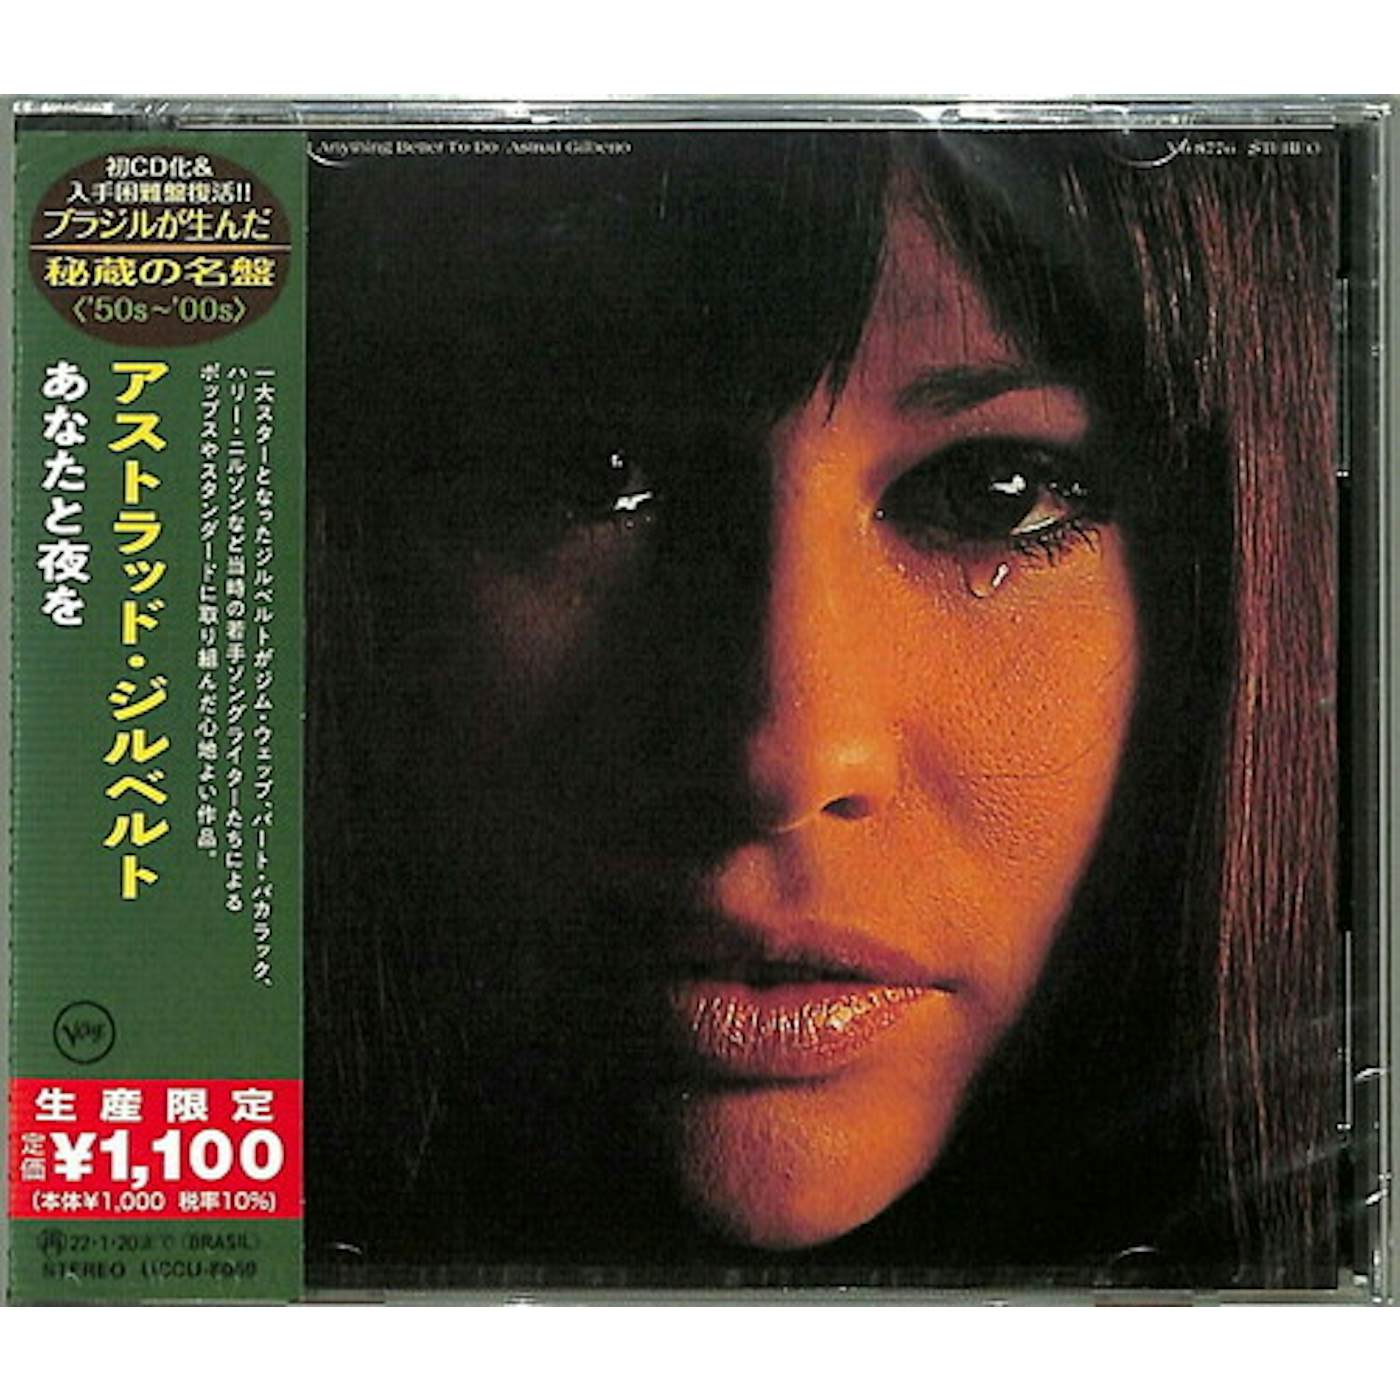 Astrud Gilberto I HAVEN'T GOT ANYTHING BETTER TO DO CD